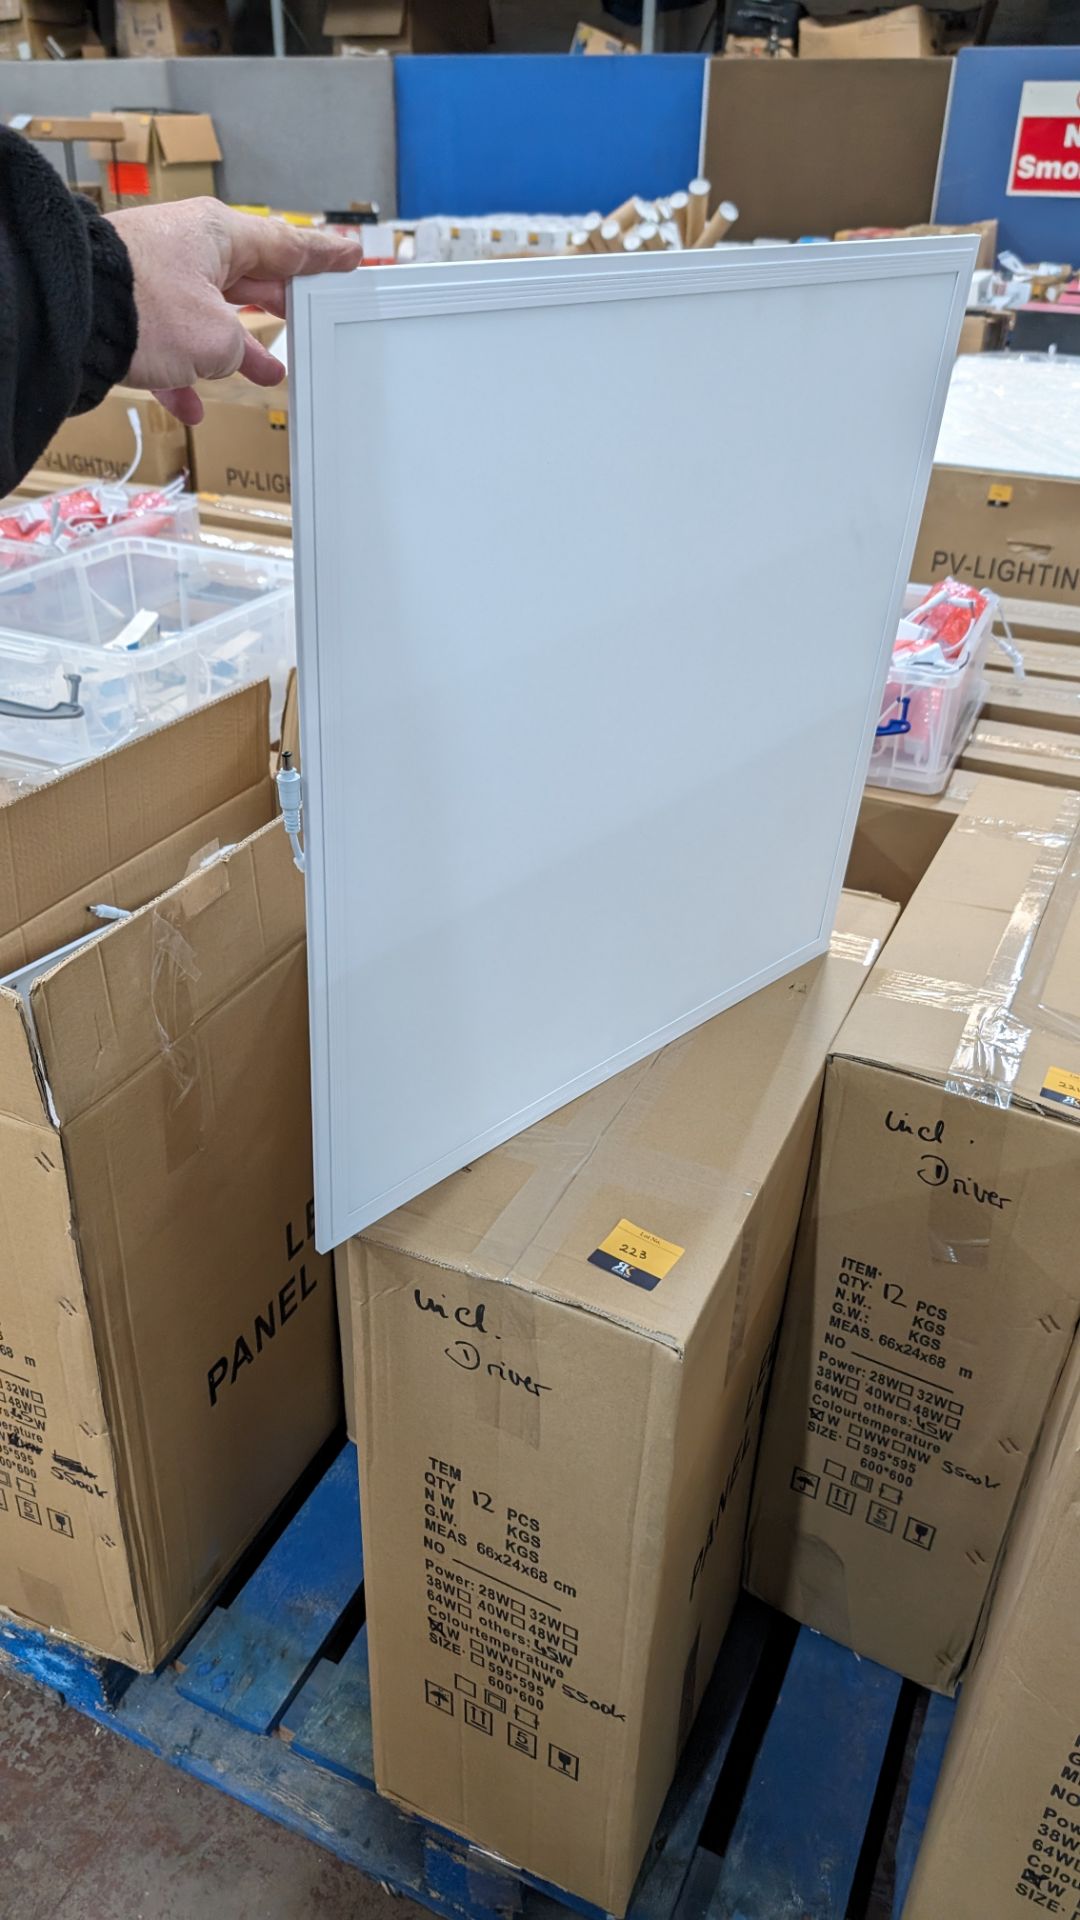 12 off 595mm x 595mm 5500k 45w LED lighting panels, each including driver - 1 carton - Image 2 of 4